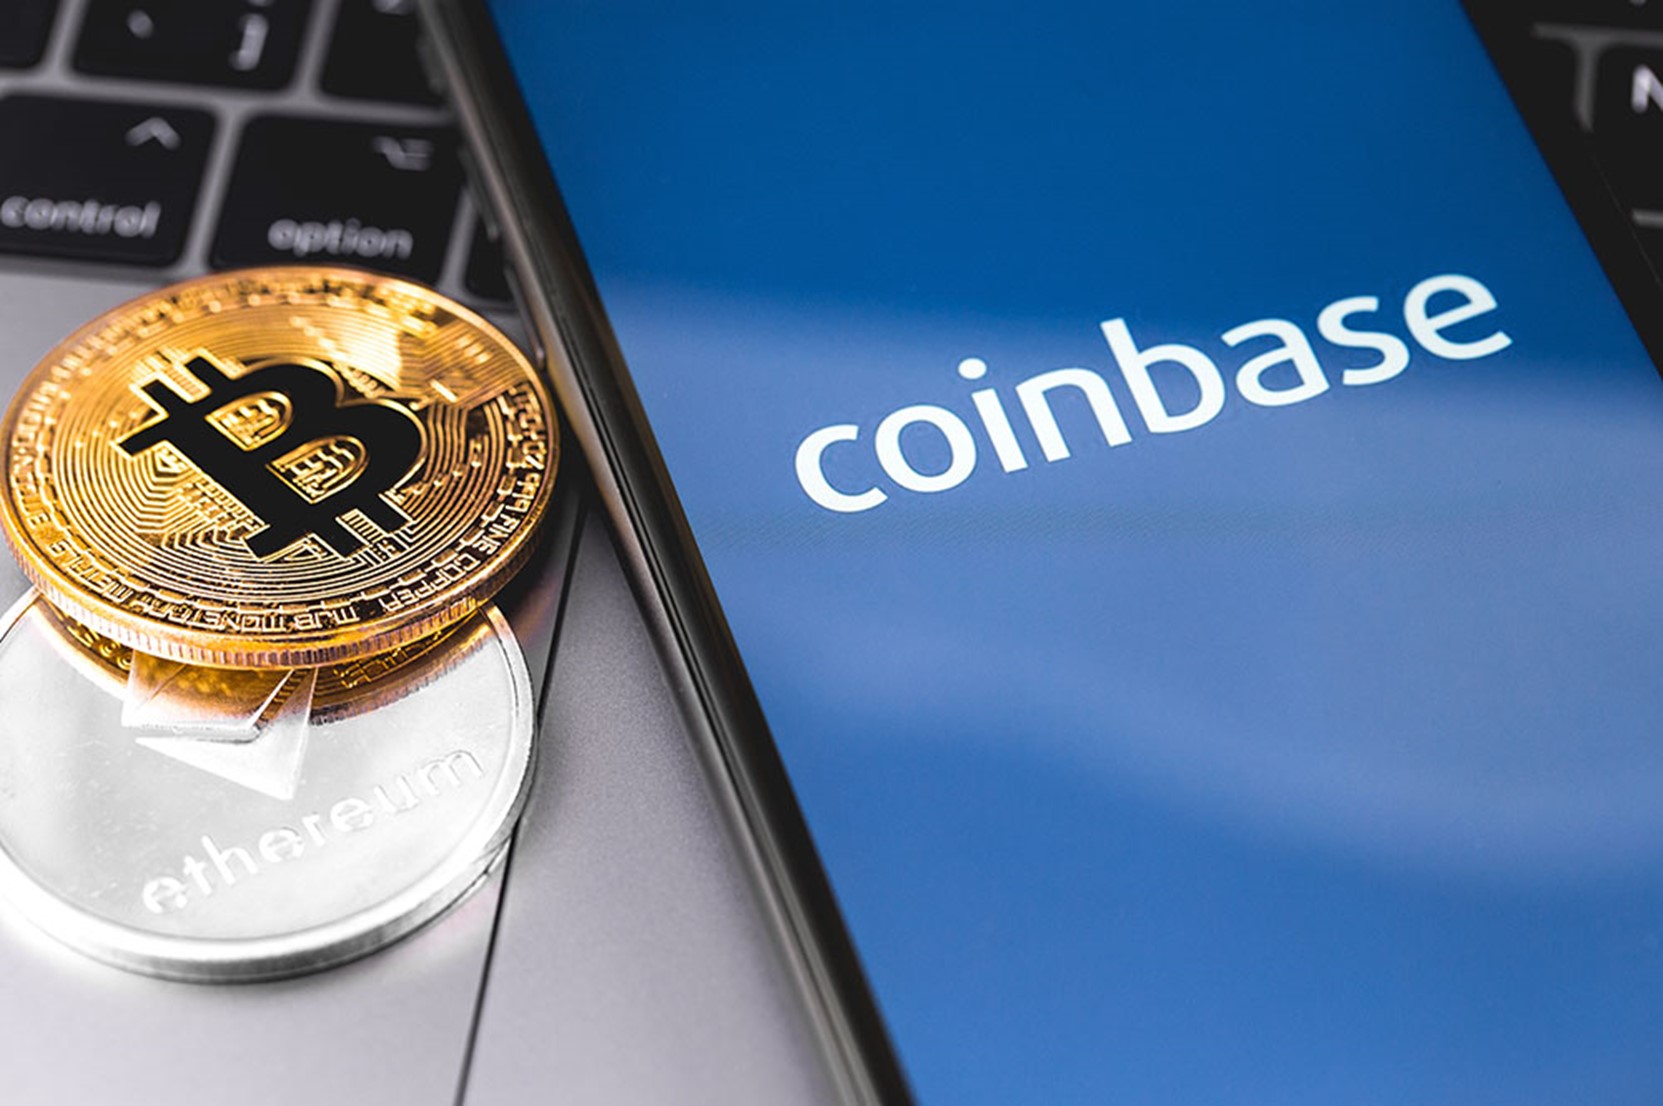 How to Invest in Coinbase Stock